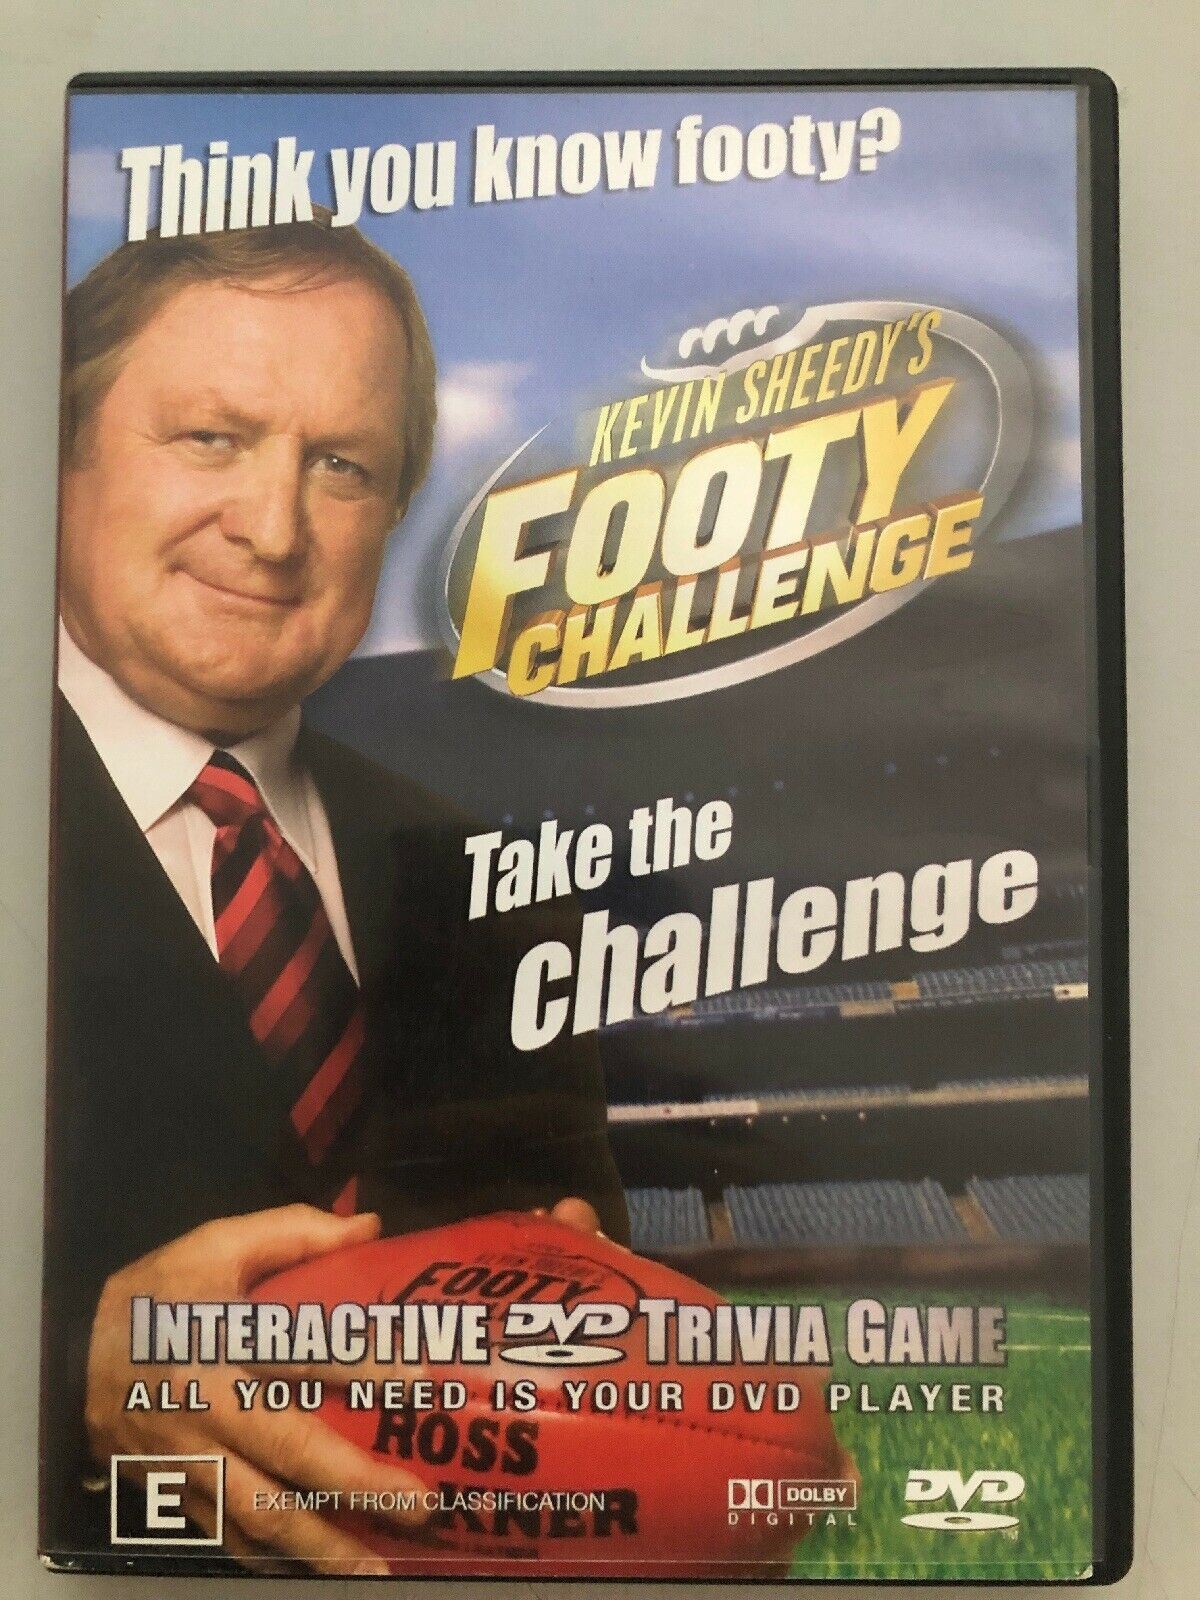 Kevin Sheedy's Footy Challenge (DVD, 2005) Interactive DVD Quiz TV Game